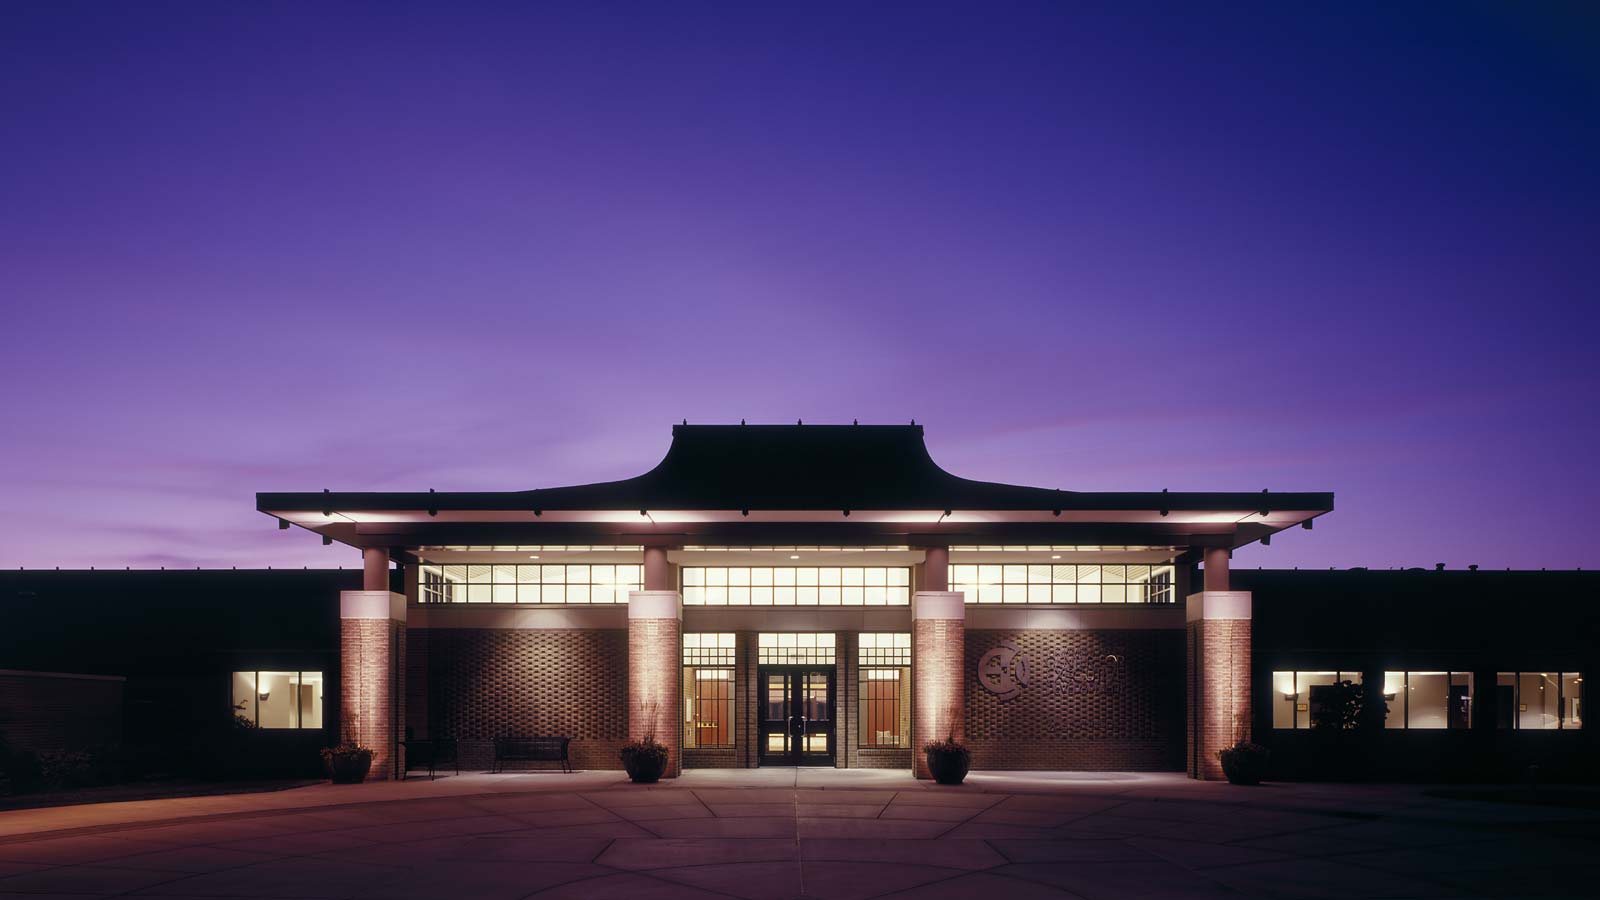 The front exterior entrance to the Henry Center for Executive Development, as seen at night.